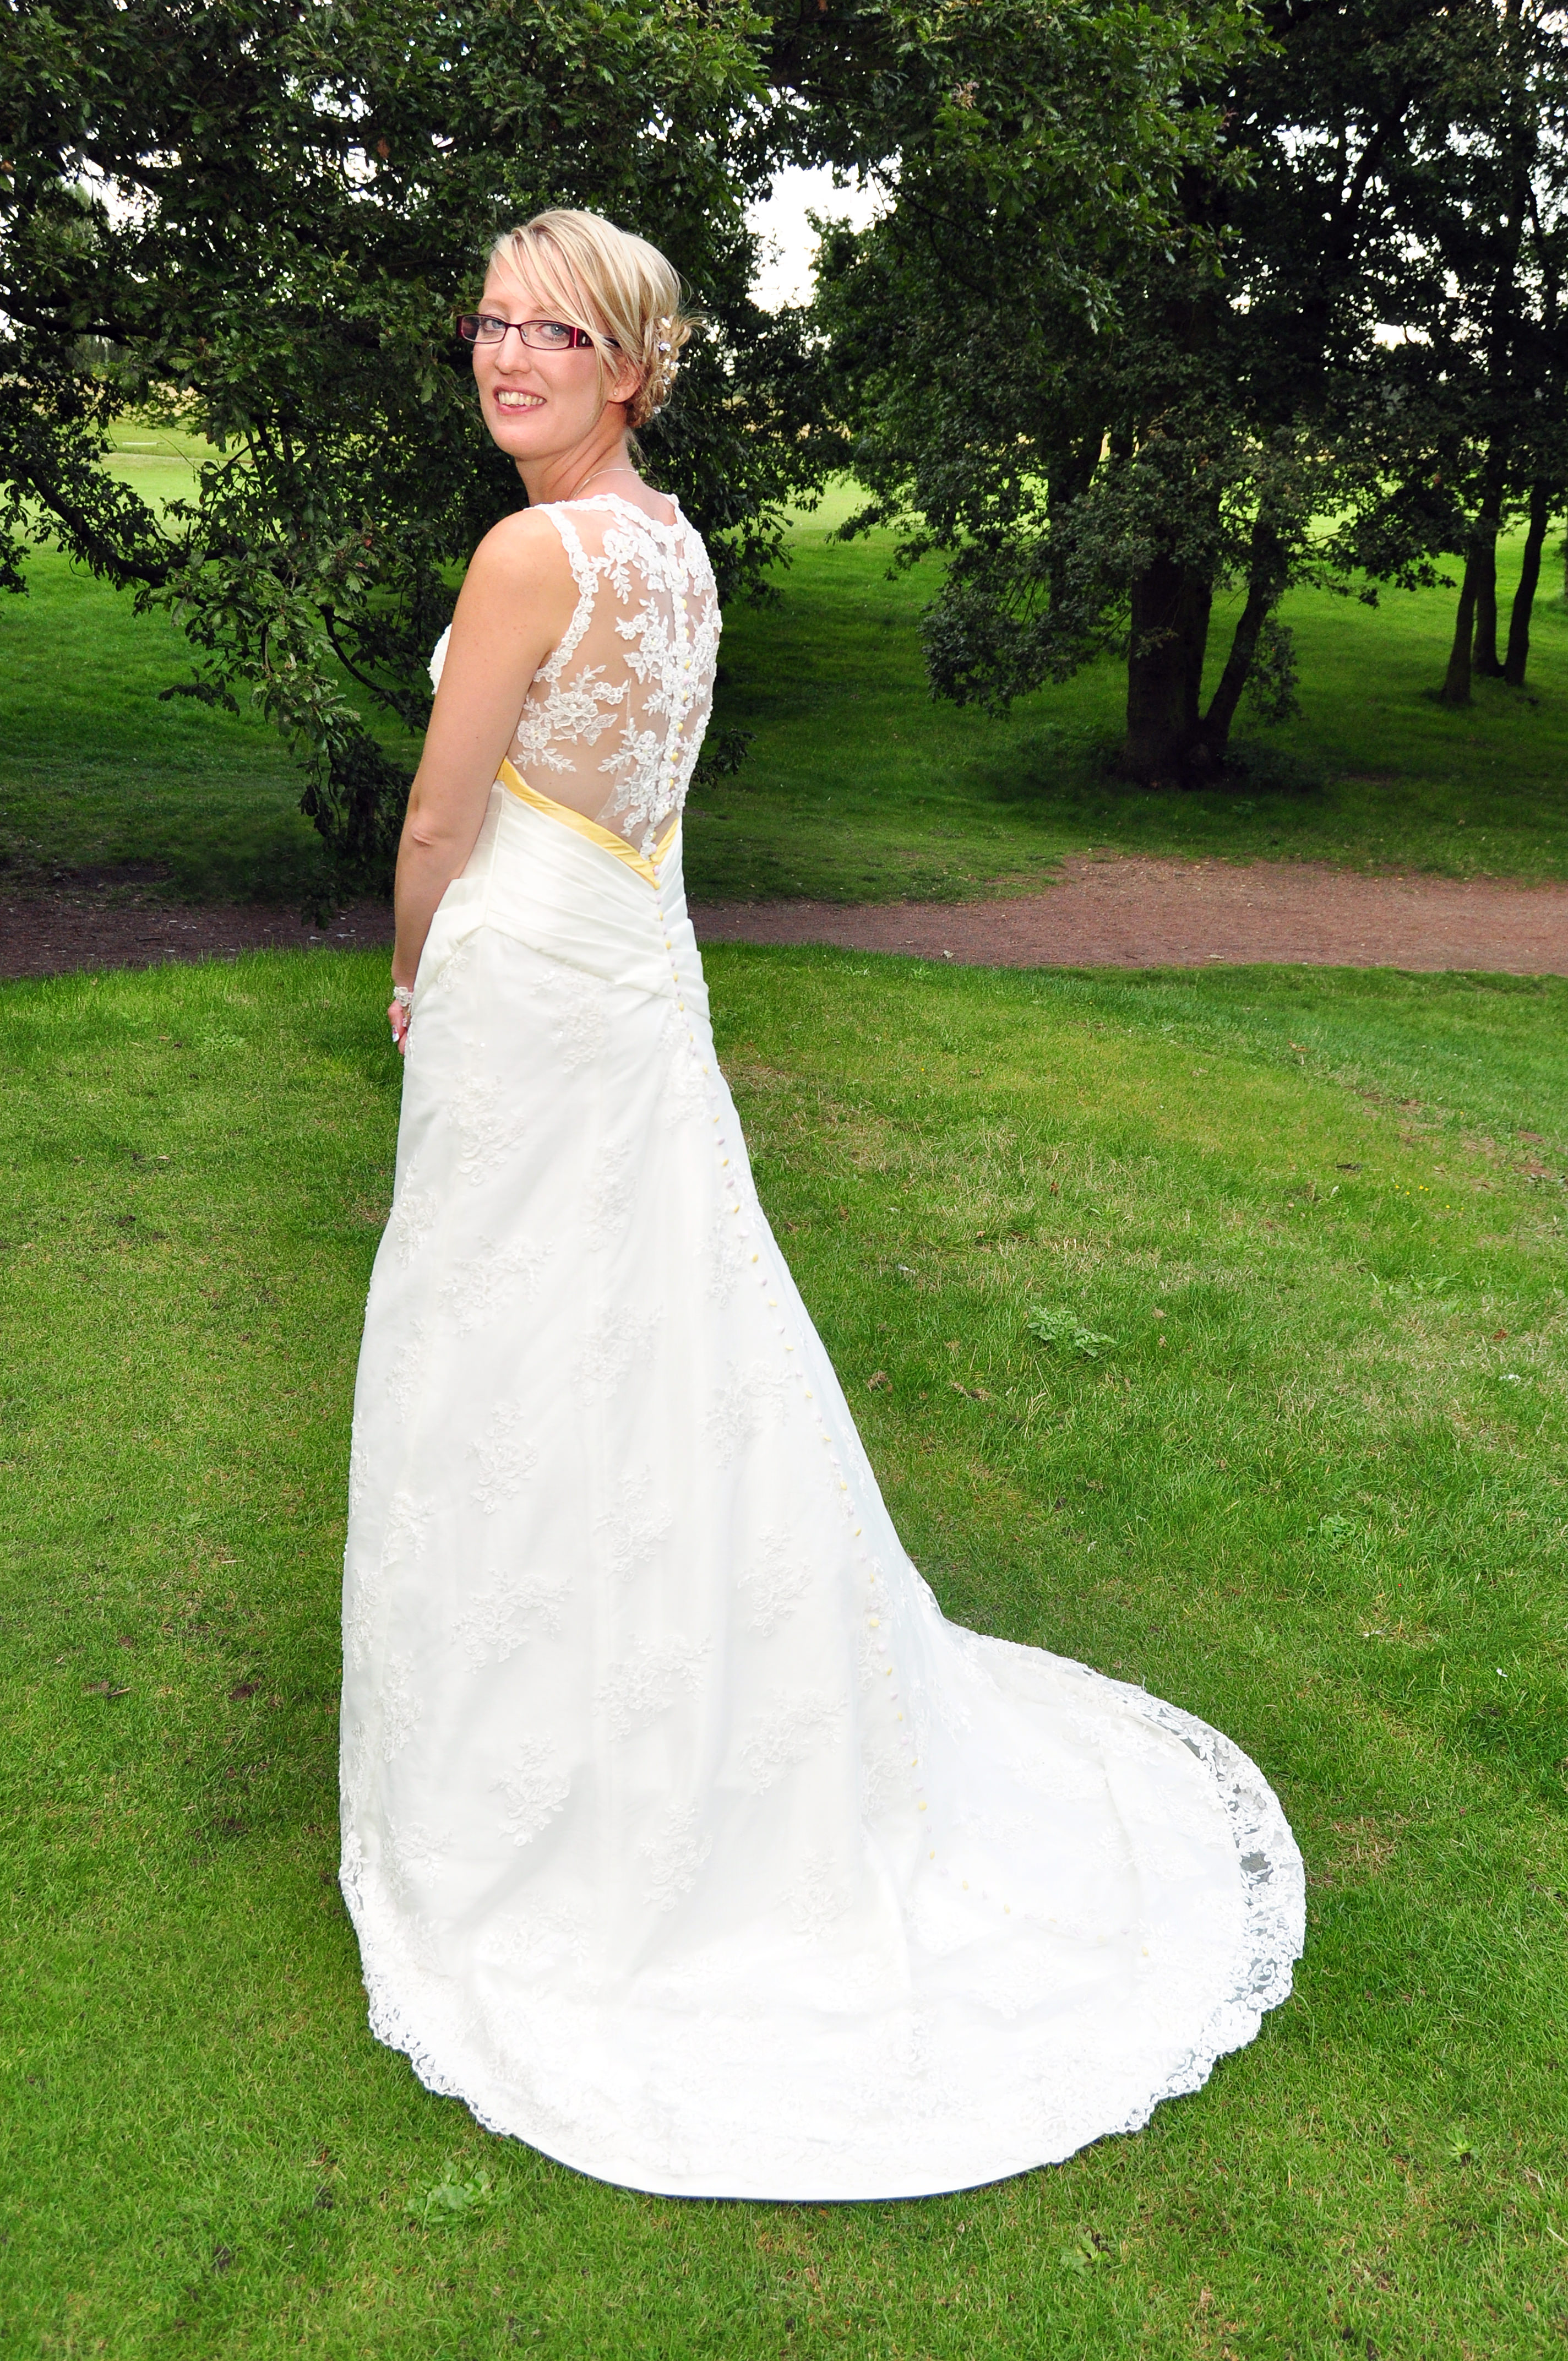 bespoke wedding gown in lace and swarovski crystal